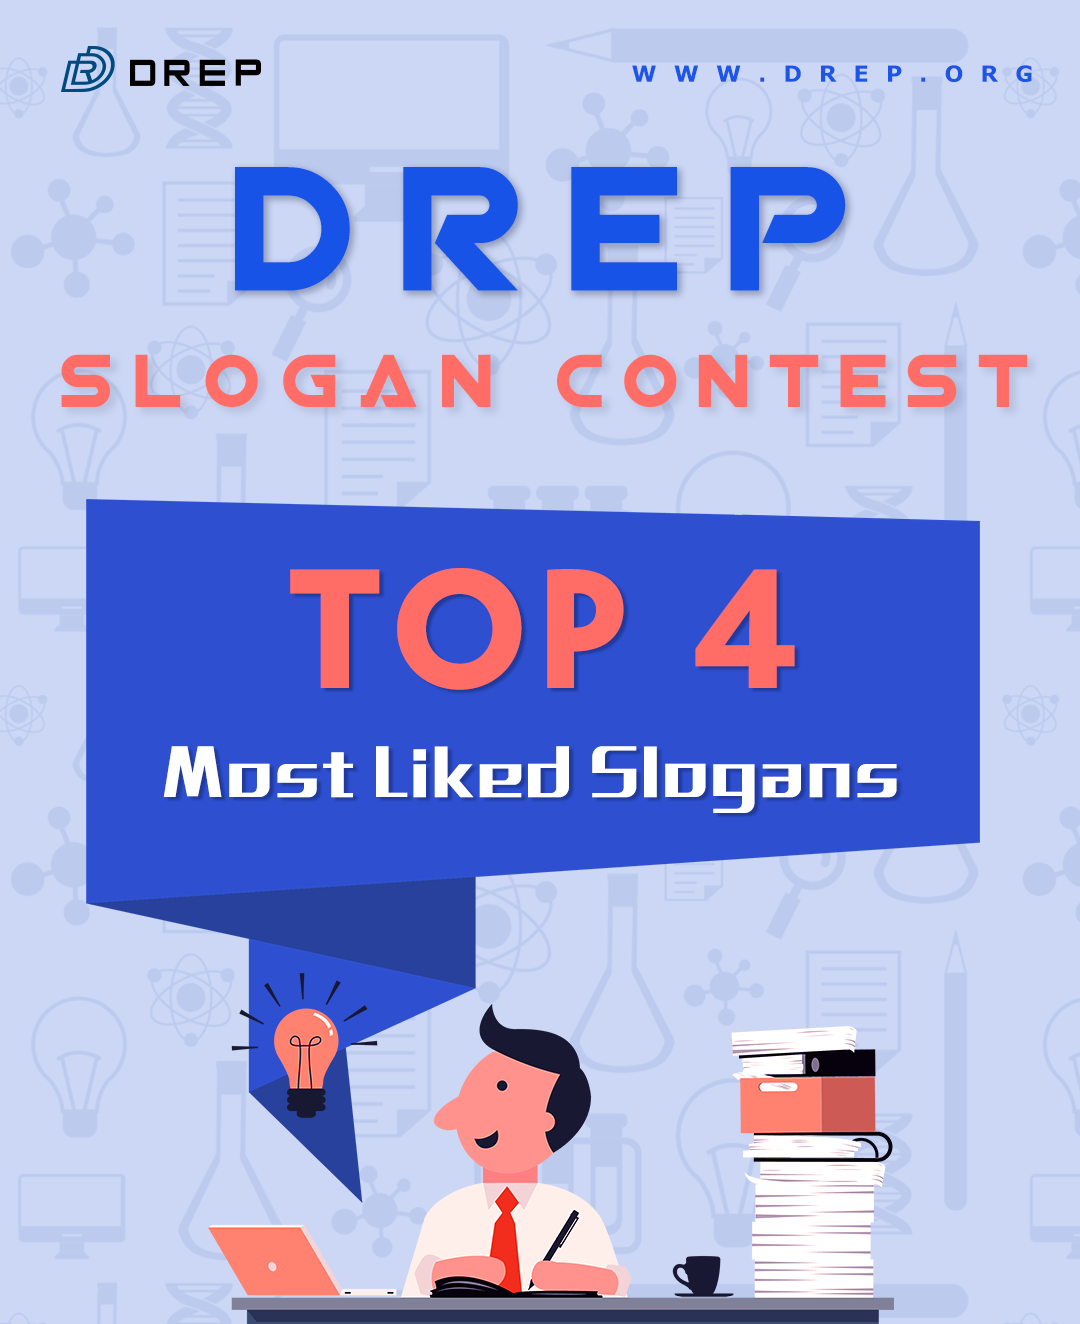 Slogan Contest — Finale is near! TOP 10 Slogan release & Vote for your